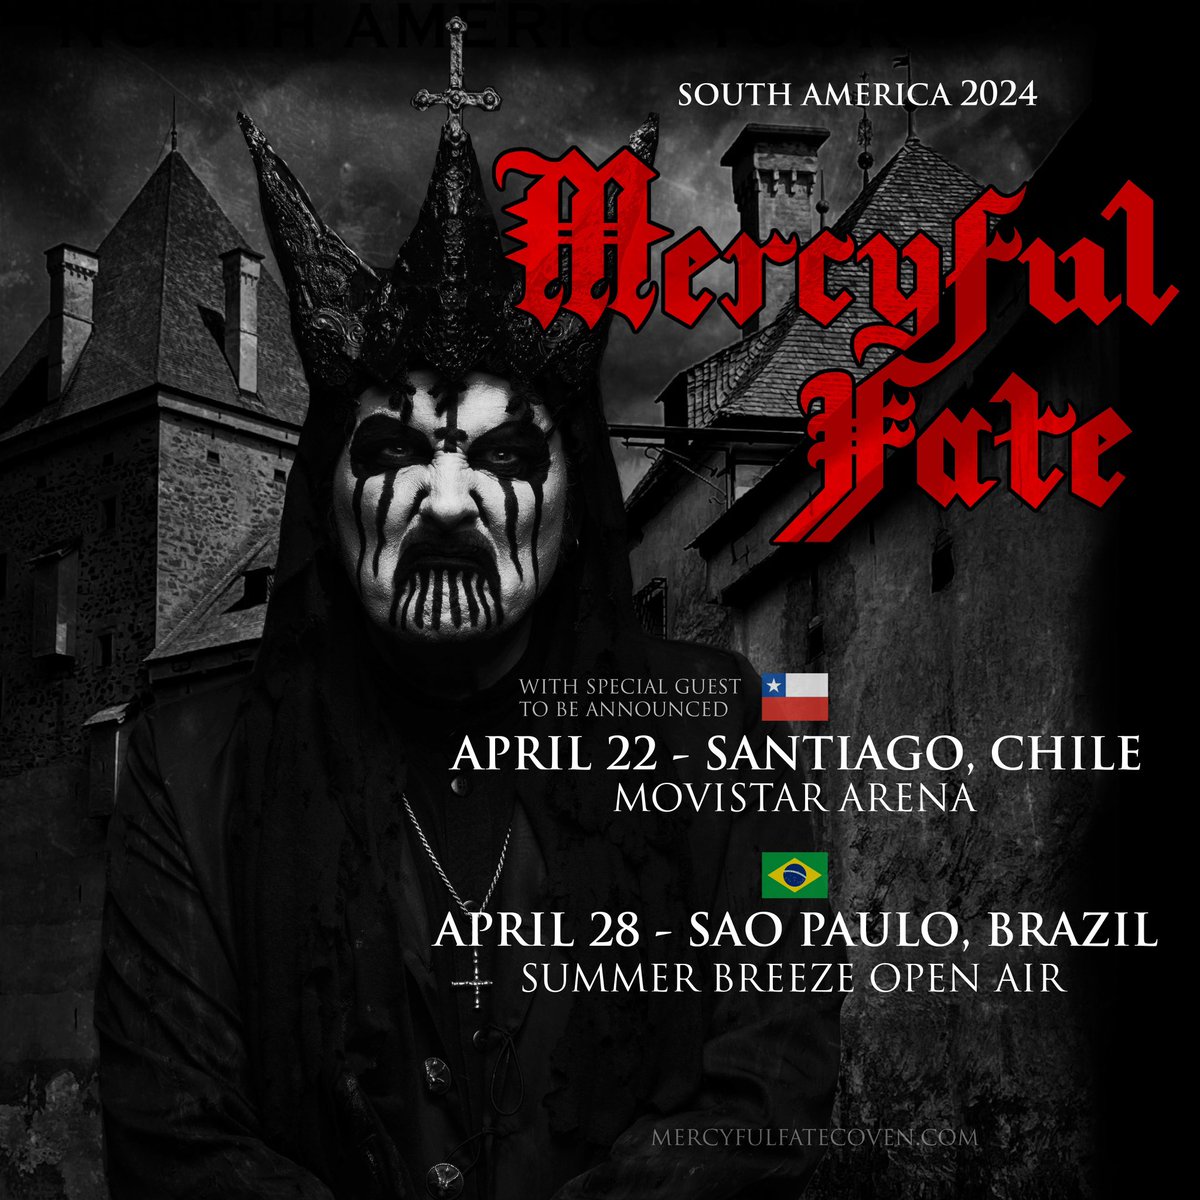 Brazil + Chile, prepare to enter the coven. We’re one month out from returning to South America. We last played for you 25 years ago! Tickets are on sale now at mercyfulfatecoven.com/tour 🚨We are now headlining Sunday April 28th in Brazil at Summer Breeze Open Air. 🚨